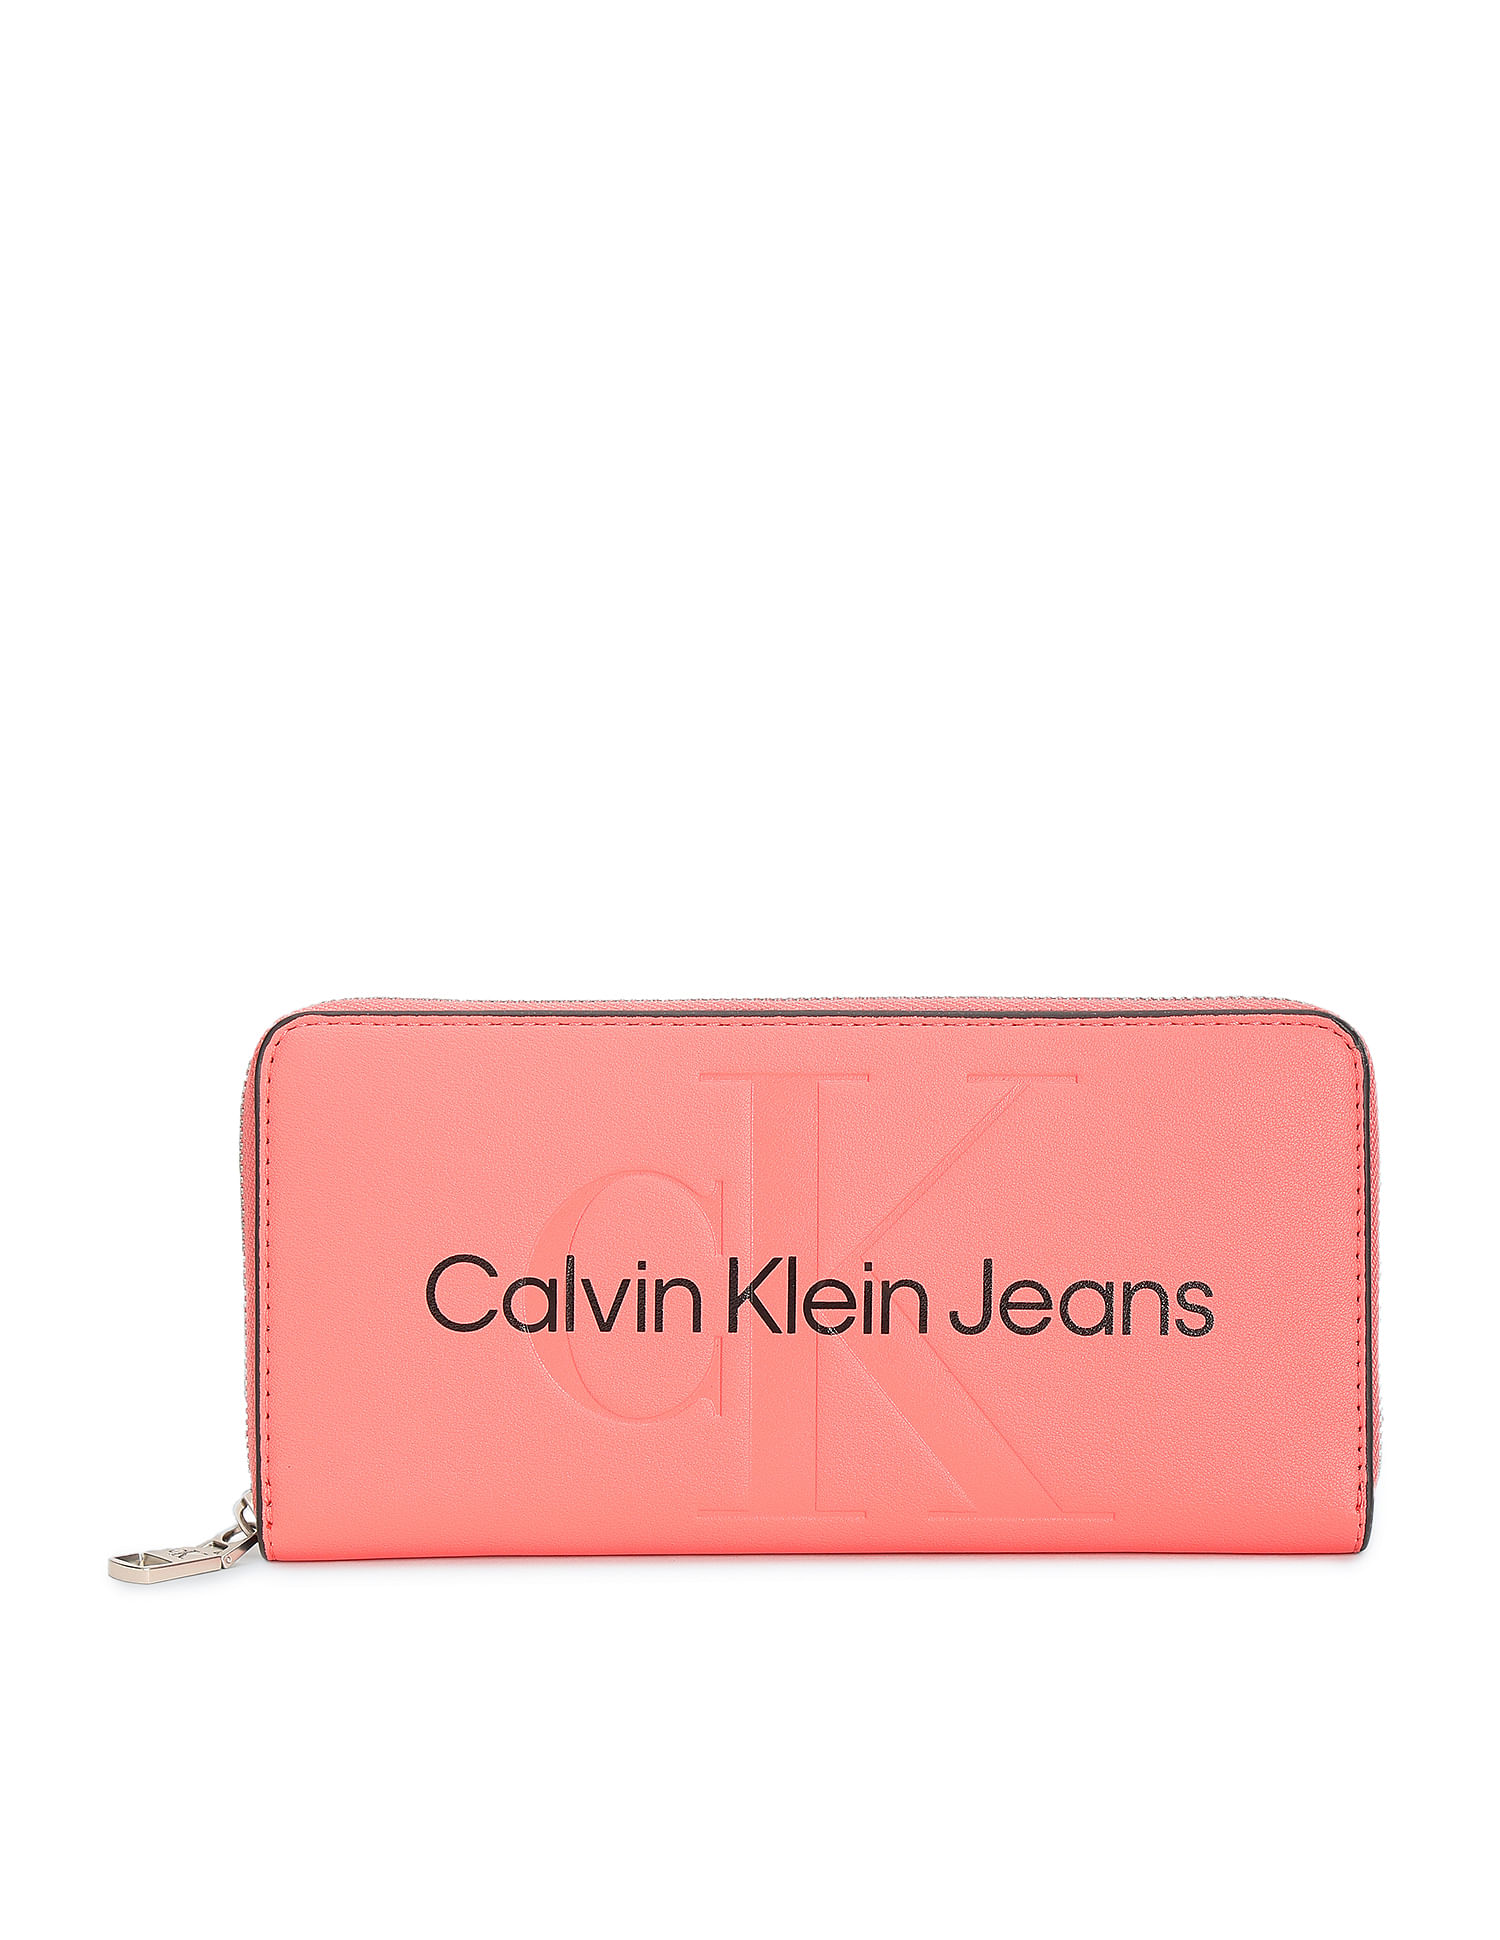 Buy Vintage Beautiful Calvin Klein Gold Clutch Purse Online in India - Etsy